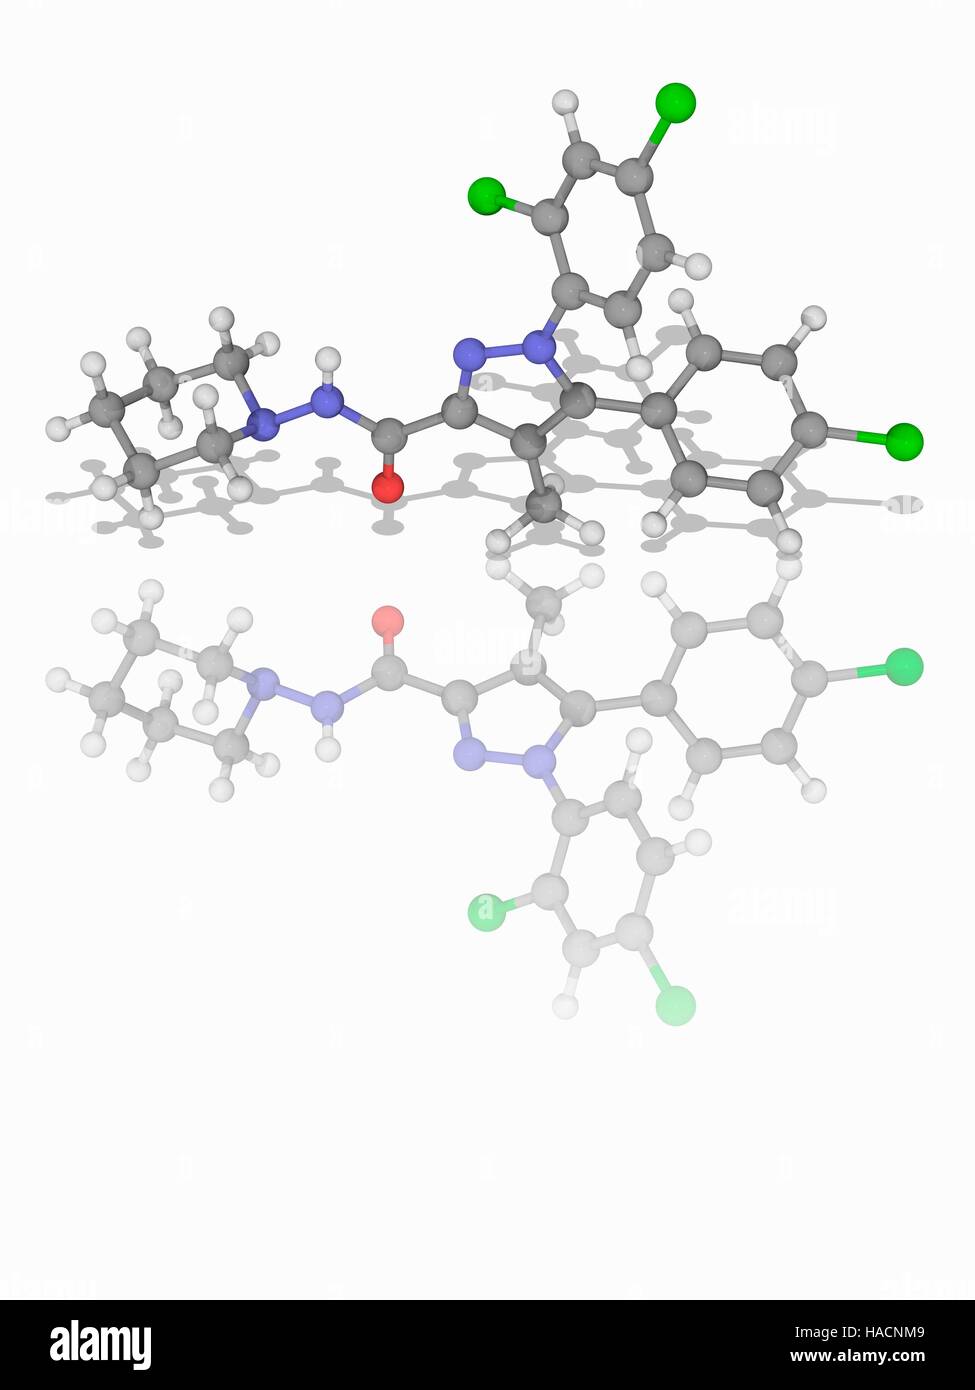 Rimonabant. Molecular model of the drug rimonabant (C22.H21.Cl3.N4.O) that was marketed as Acomplia. This is an anorectic anti-obesity drug that has been withdrawn from the market. Atoms are represented as spheres and are colour-coded: carbon (grey), hydrogen (white), nitrogen (blue), oxygen (red) and chlorine (green). Illustration. Stock Photo